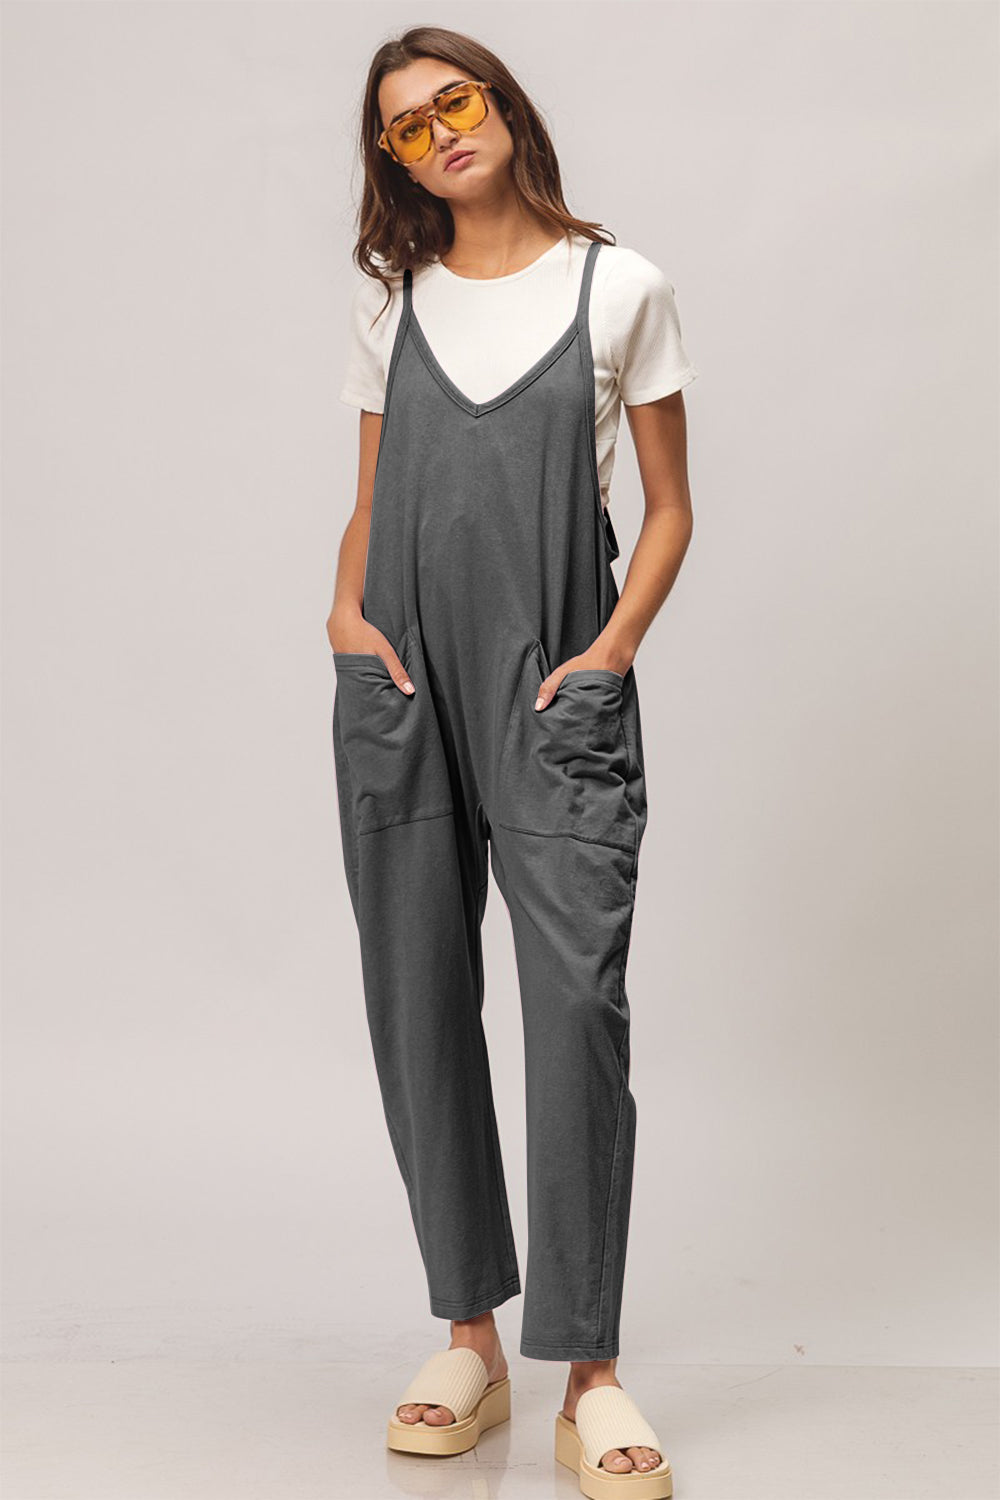 Light Gray BiBi Washed Sleeveless Overalls with Front Pockets Sentient Beauty Fashions Apparel & Accessories